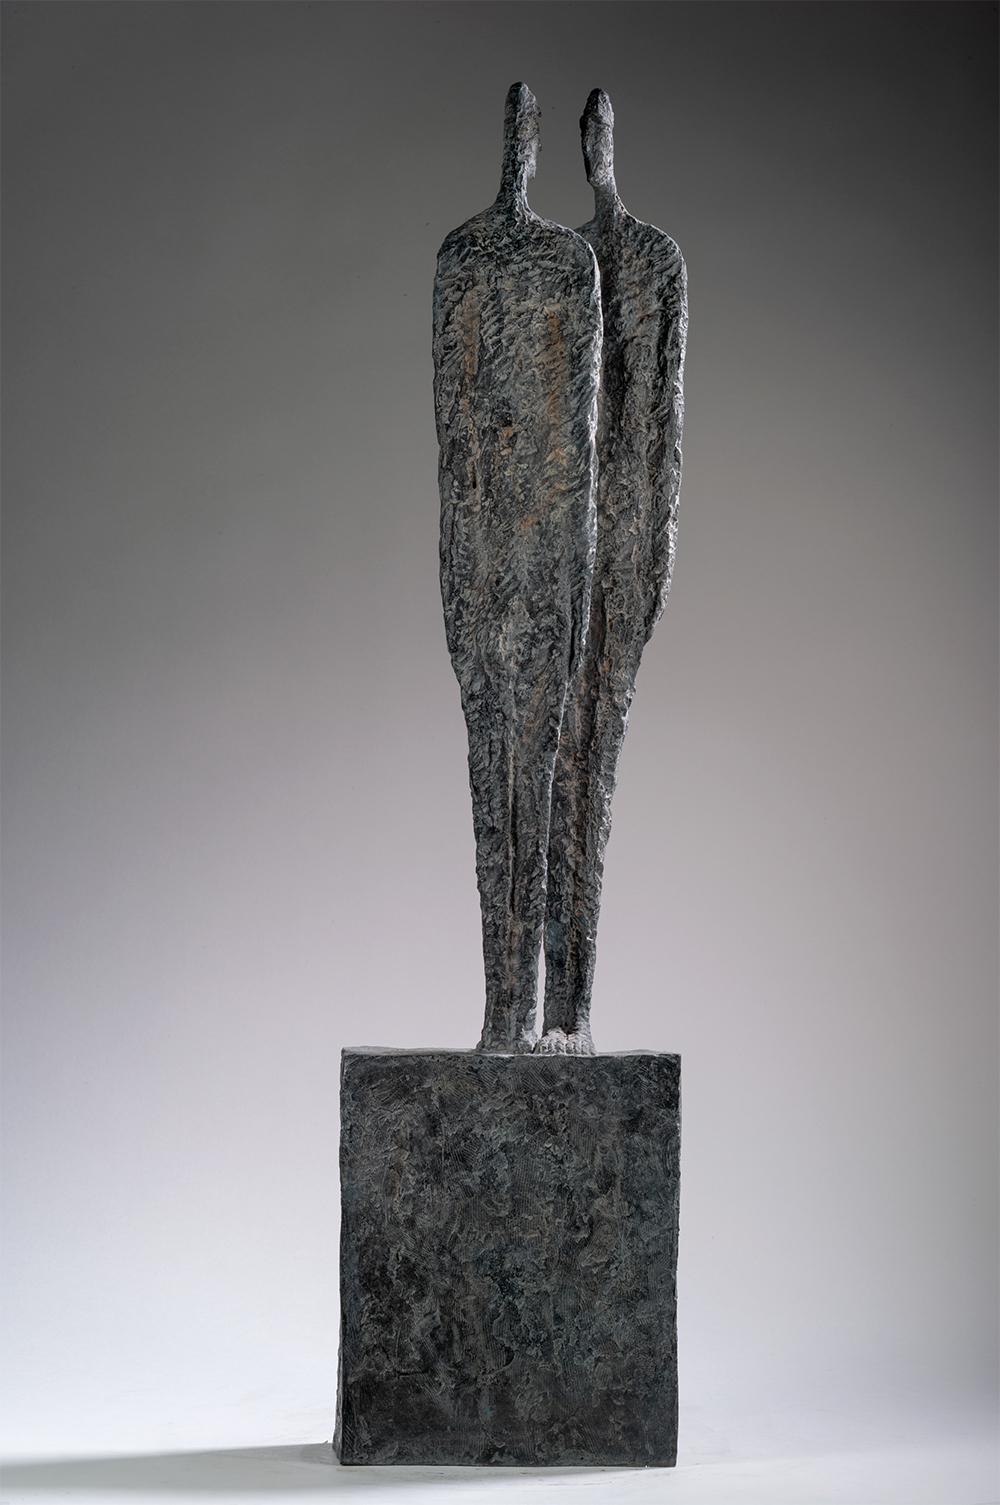 This work is a bronze sculpture, by French sculptor Martine Demal. Dimensions are 87 cm × 21 cm × 10 cm (34.3 × 8.3 × 3.9 in). Dimensions include the dimensions of the base which are 25 x 21 x 10 cm (9.8 x 8.3 x 4 in). 
This work is part of a